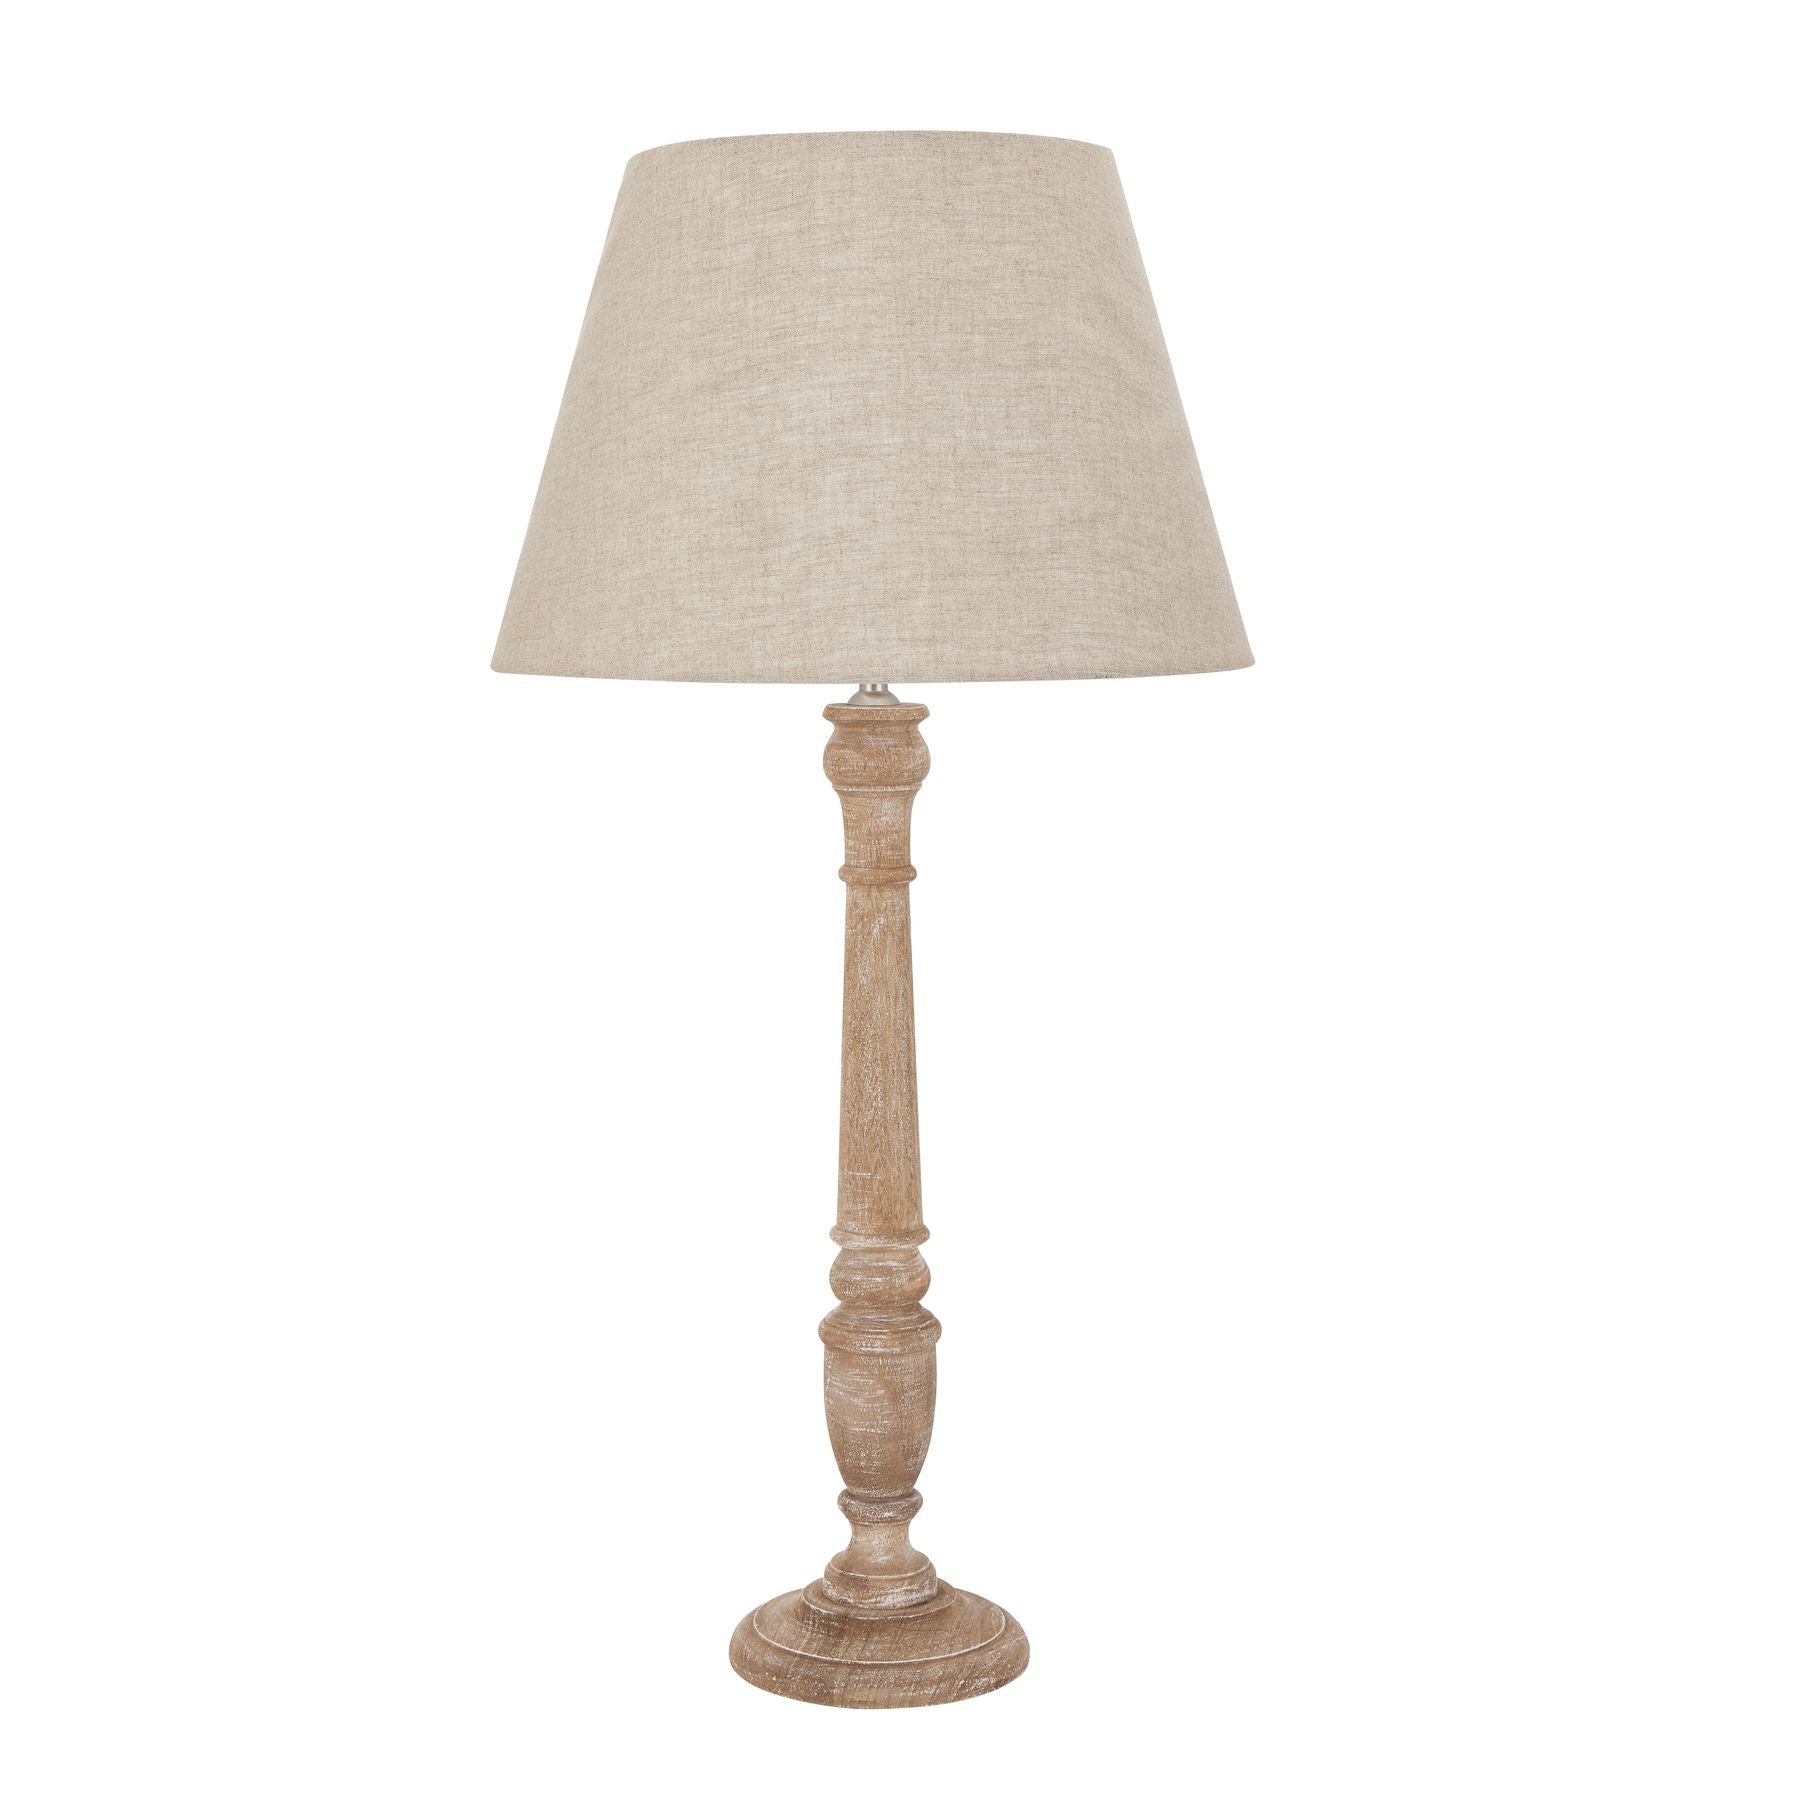 View Delaney Natural Wash Spindle Lamp With Linen Shade information